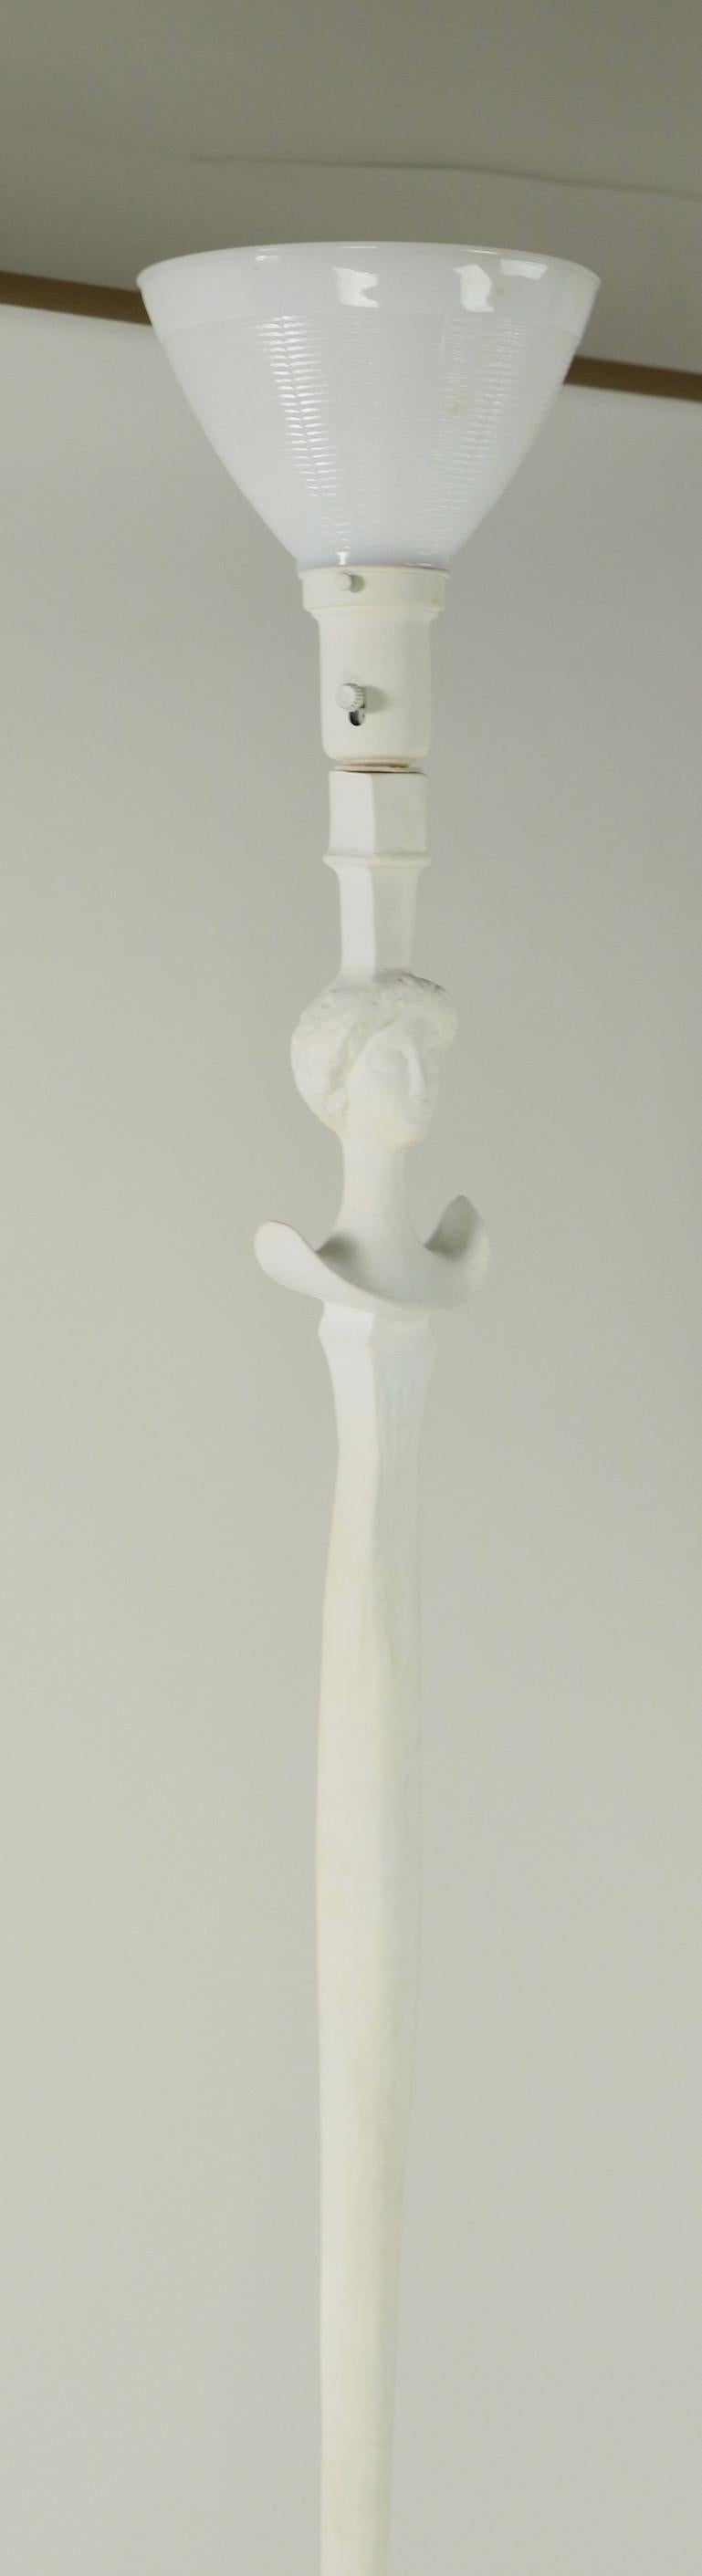 Resin Plaster Tete De Femme Floor Lamp by Sirmos after Giacometti